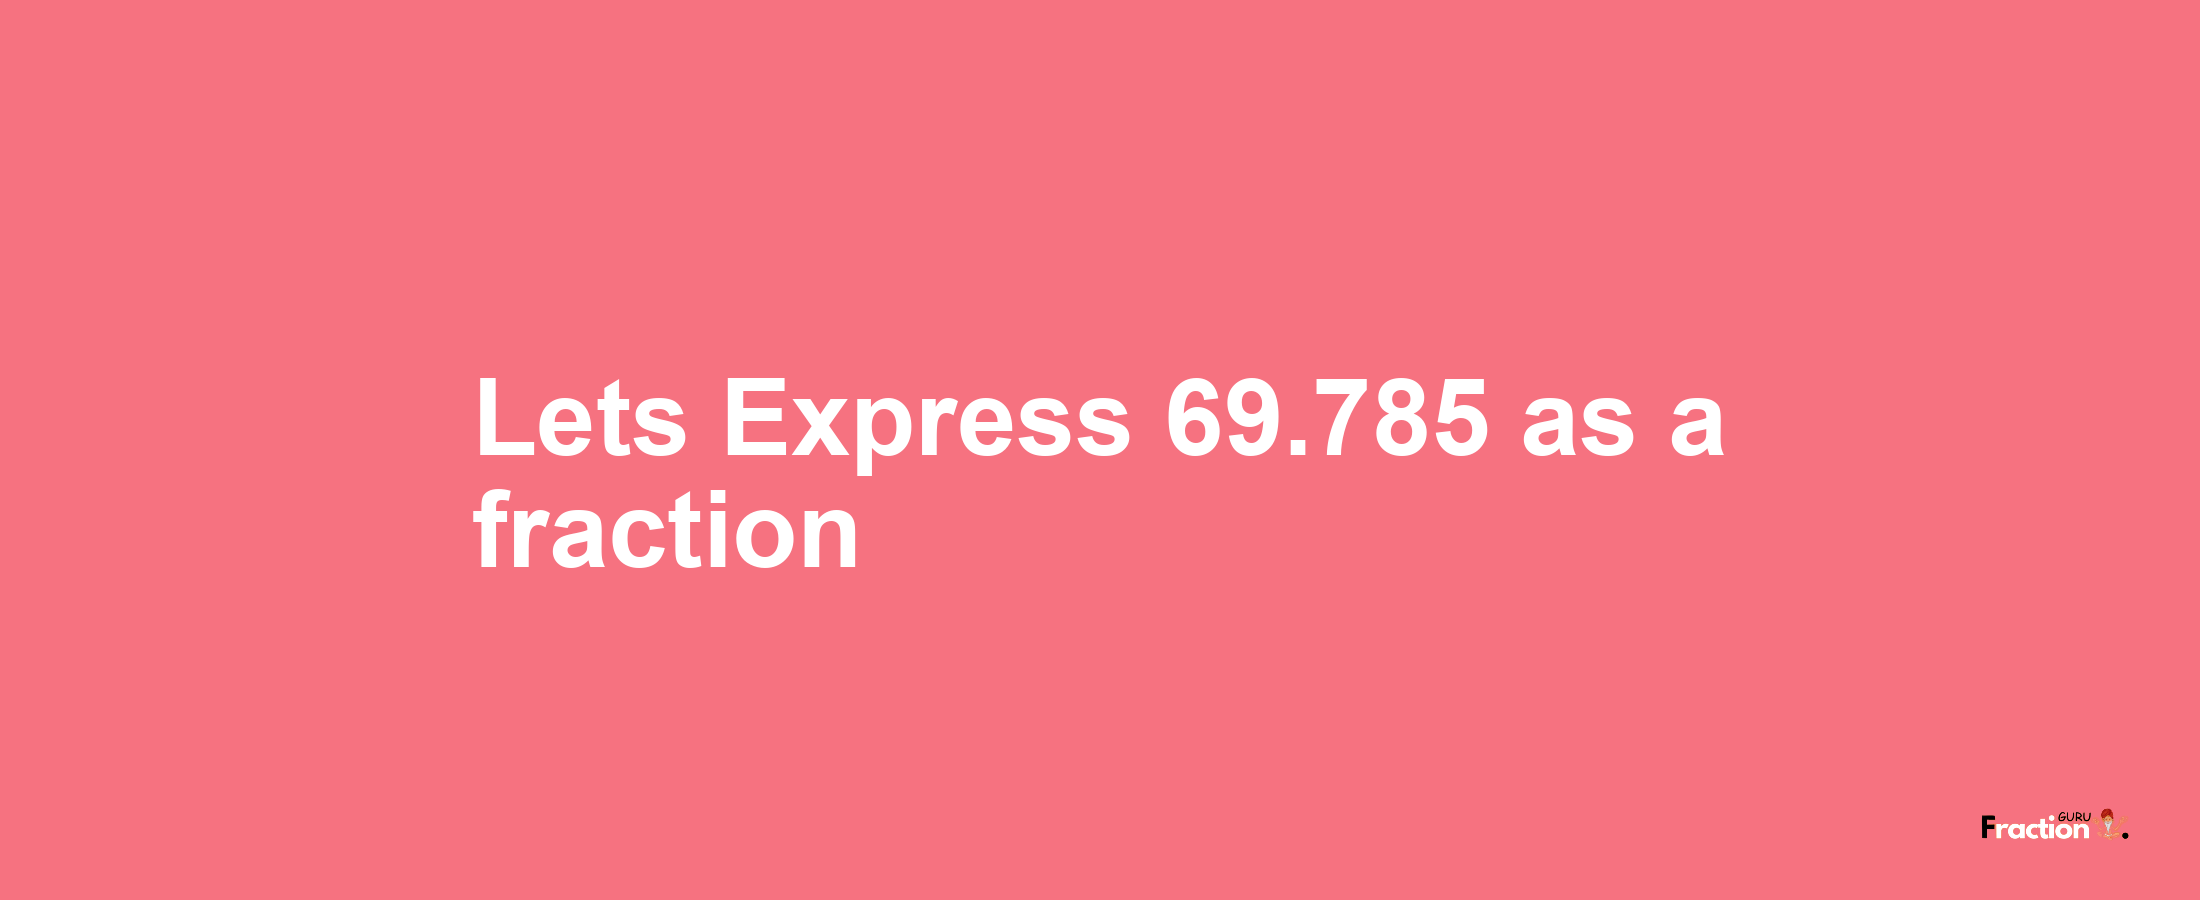 Lets Express 69.785 as afraction